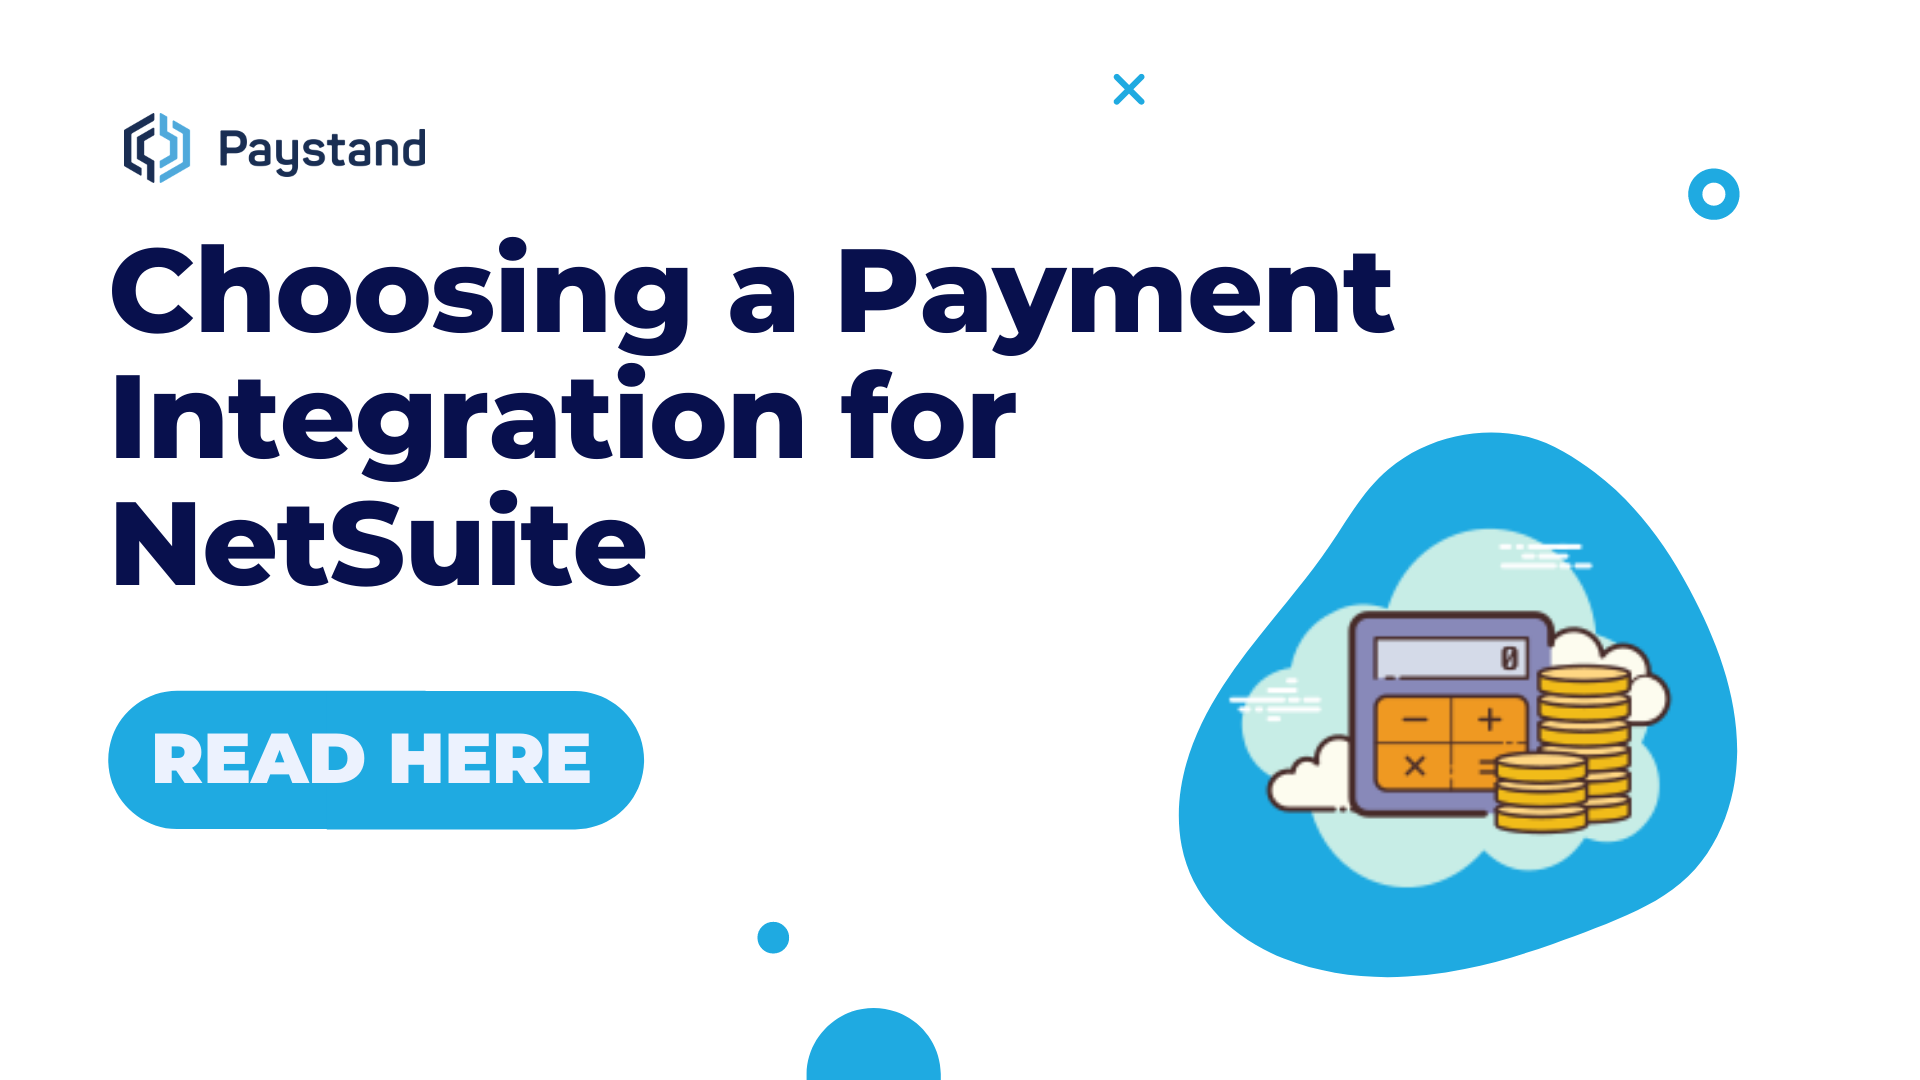 What to Look for When Choosing a Payment Integration for NetSuite